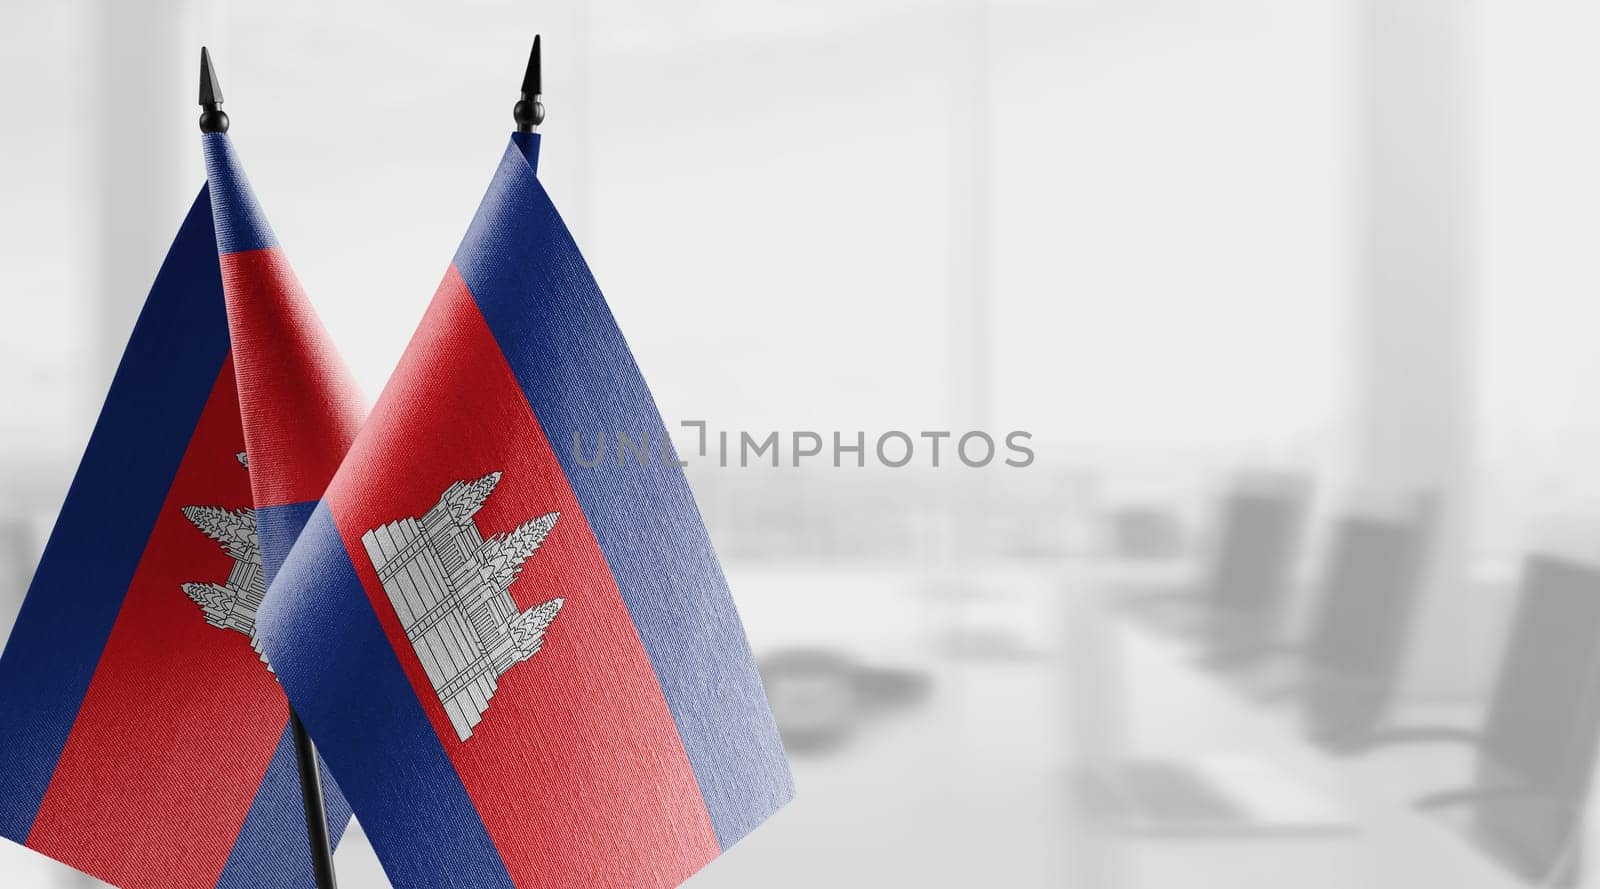 A small Cambodia flag on an abstract blurry background.